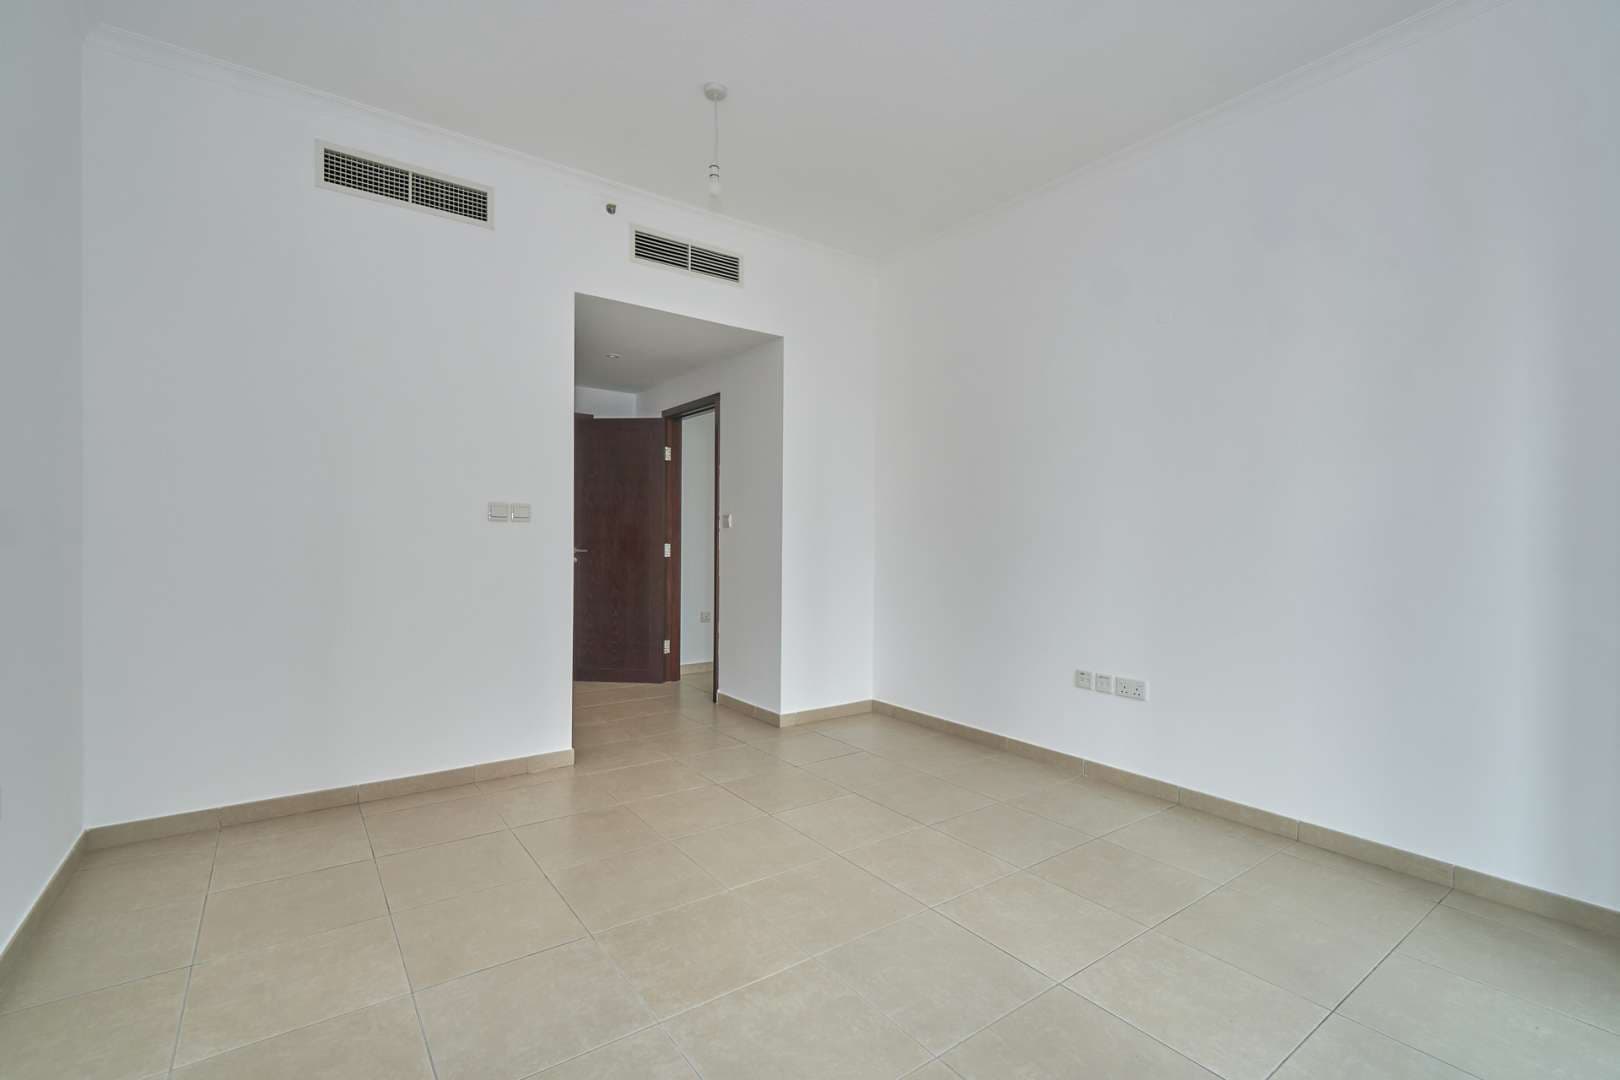 1 Bedroom Apartment For Rent The Residences Lp07968 1fb71a45d8602c00.jpg